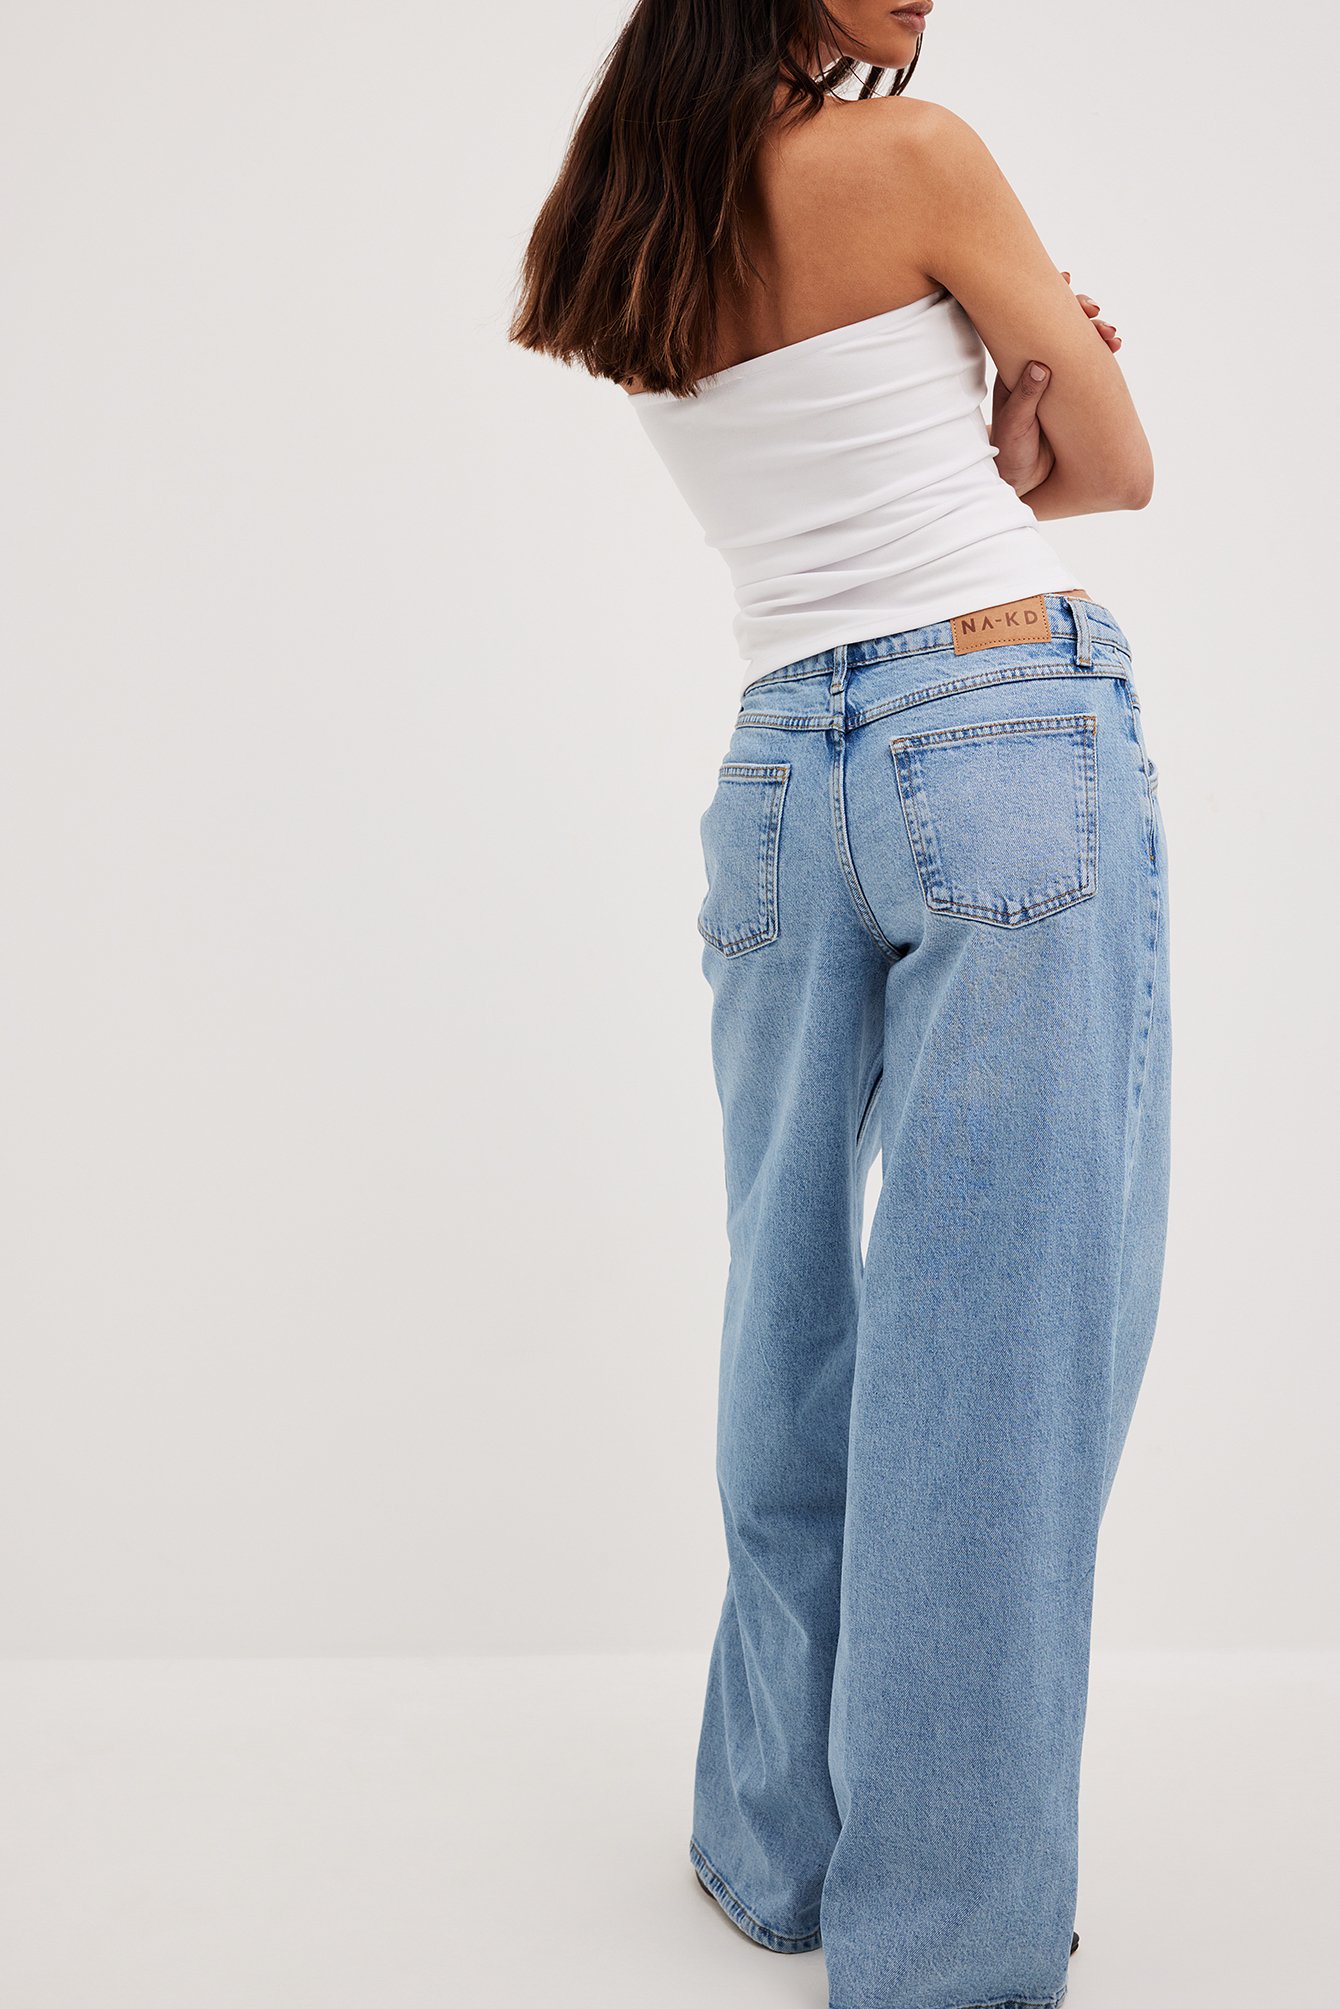 Loose Fit Jeans and Baggy Jeans for Women